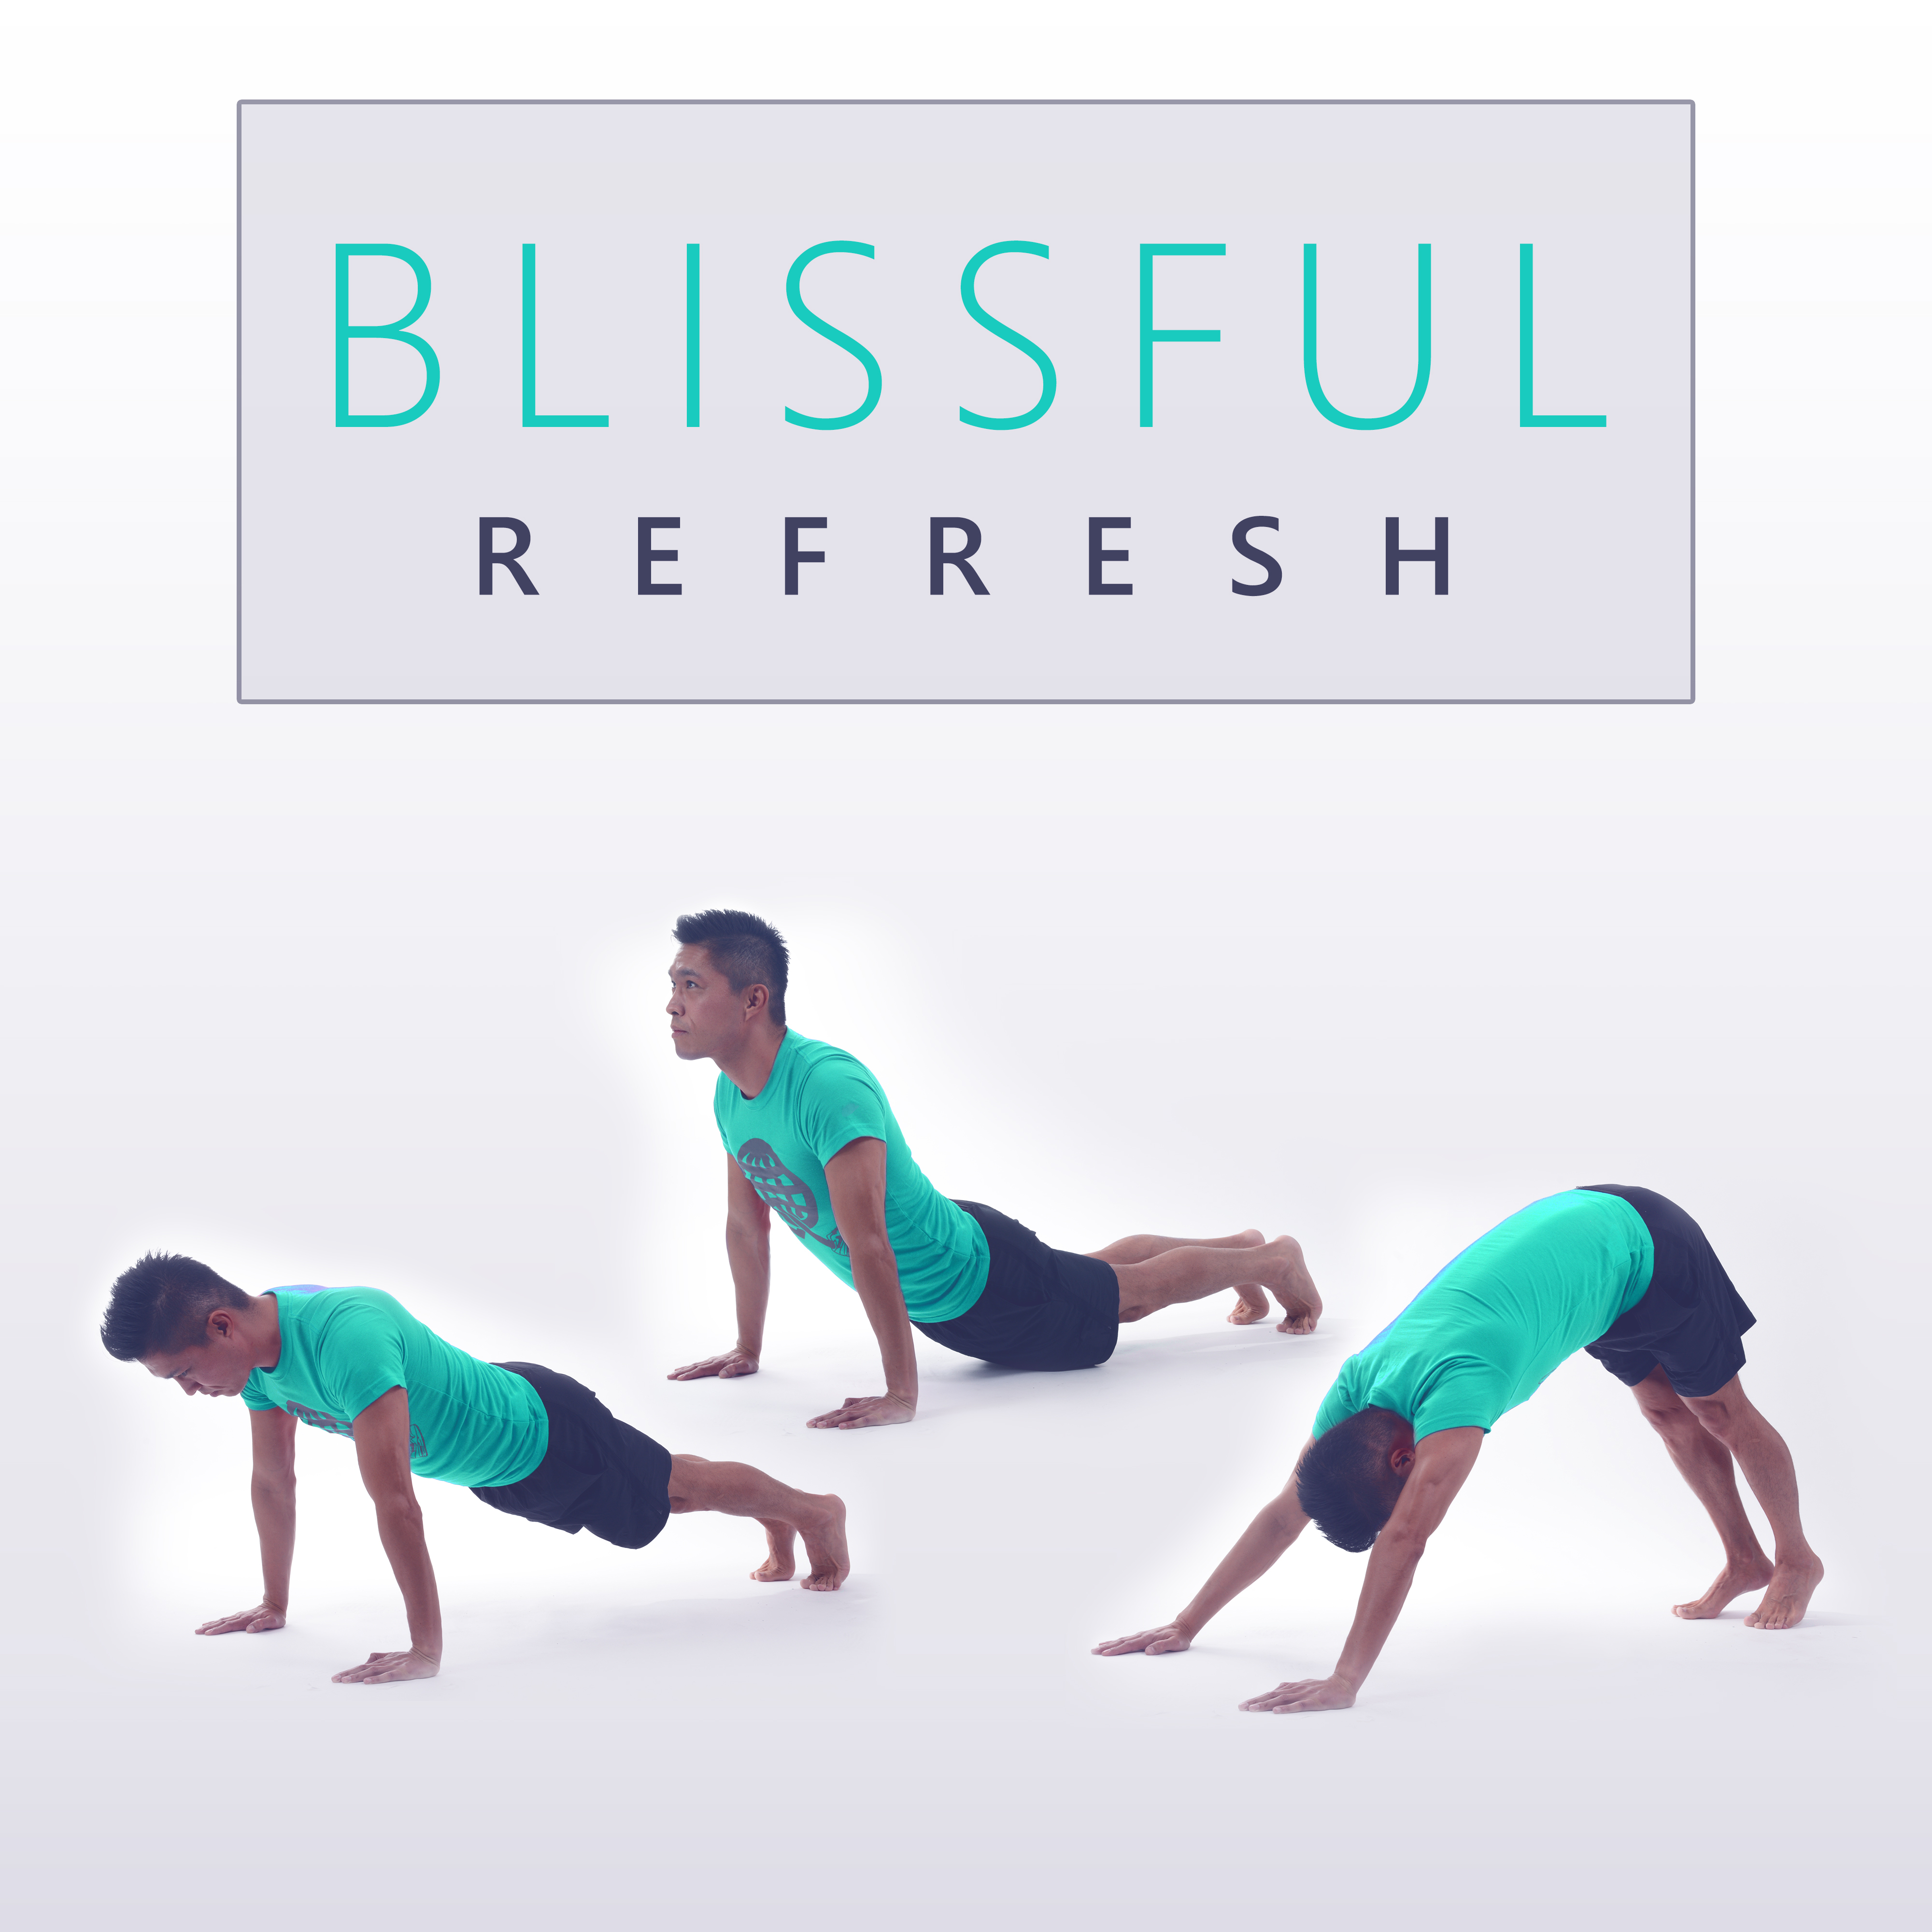 Blissful Refresh - Deep Thinking, Basin Internal, New Interest, Forgive Yourself, Rumination, Everywhere Thoughts